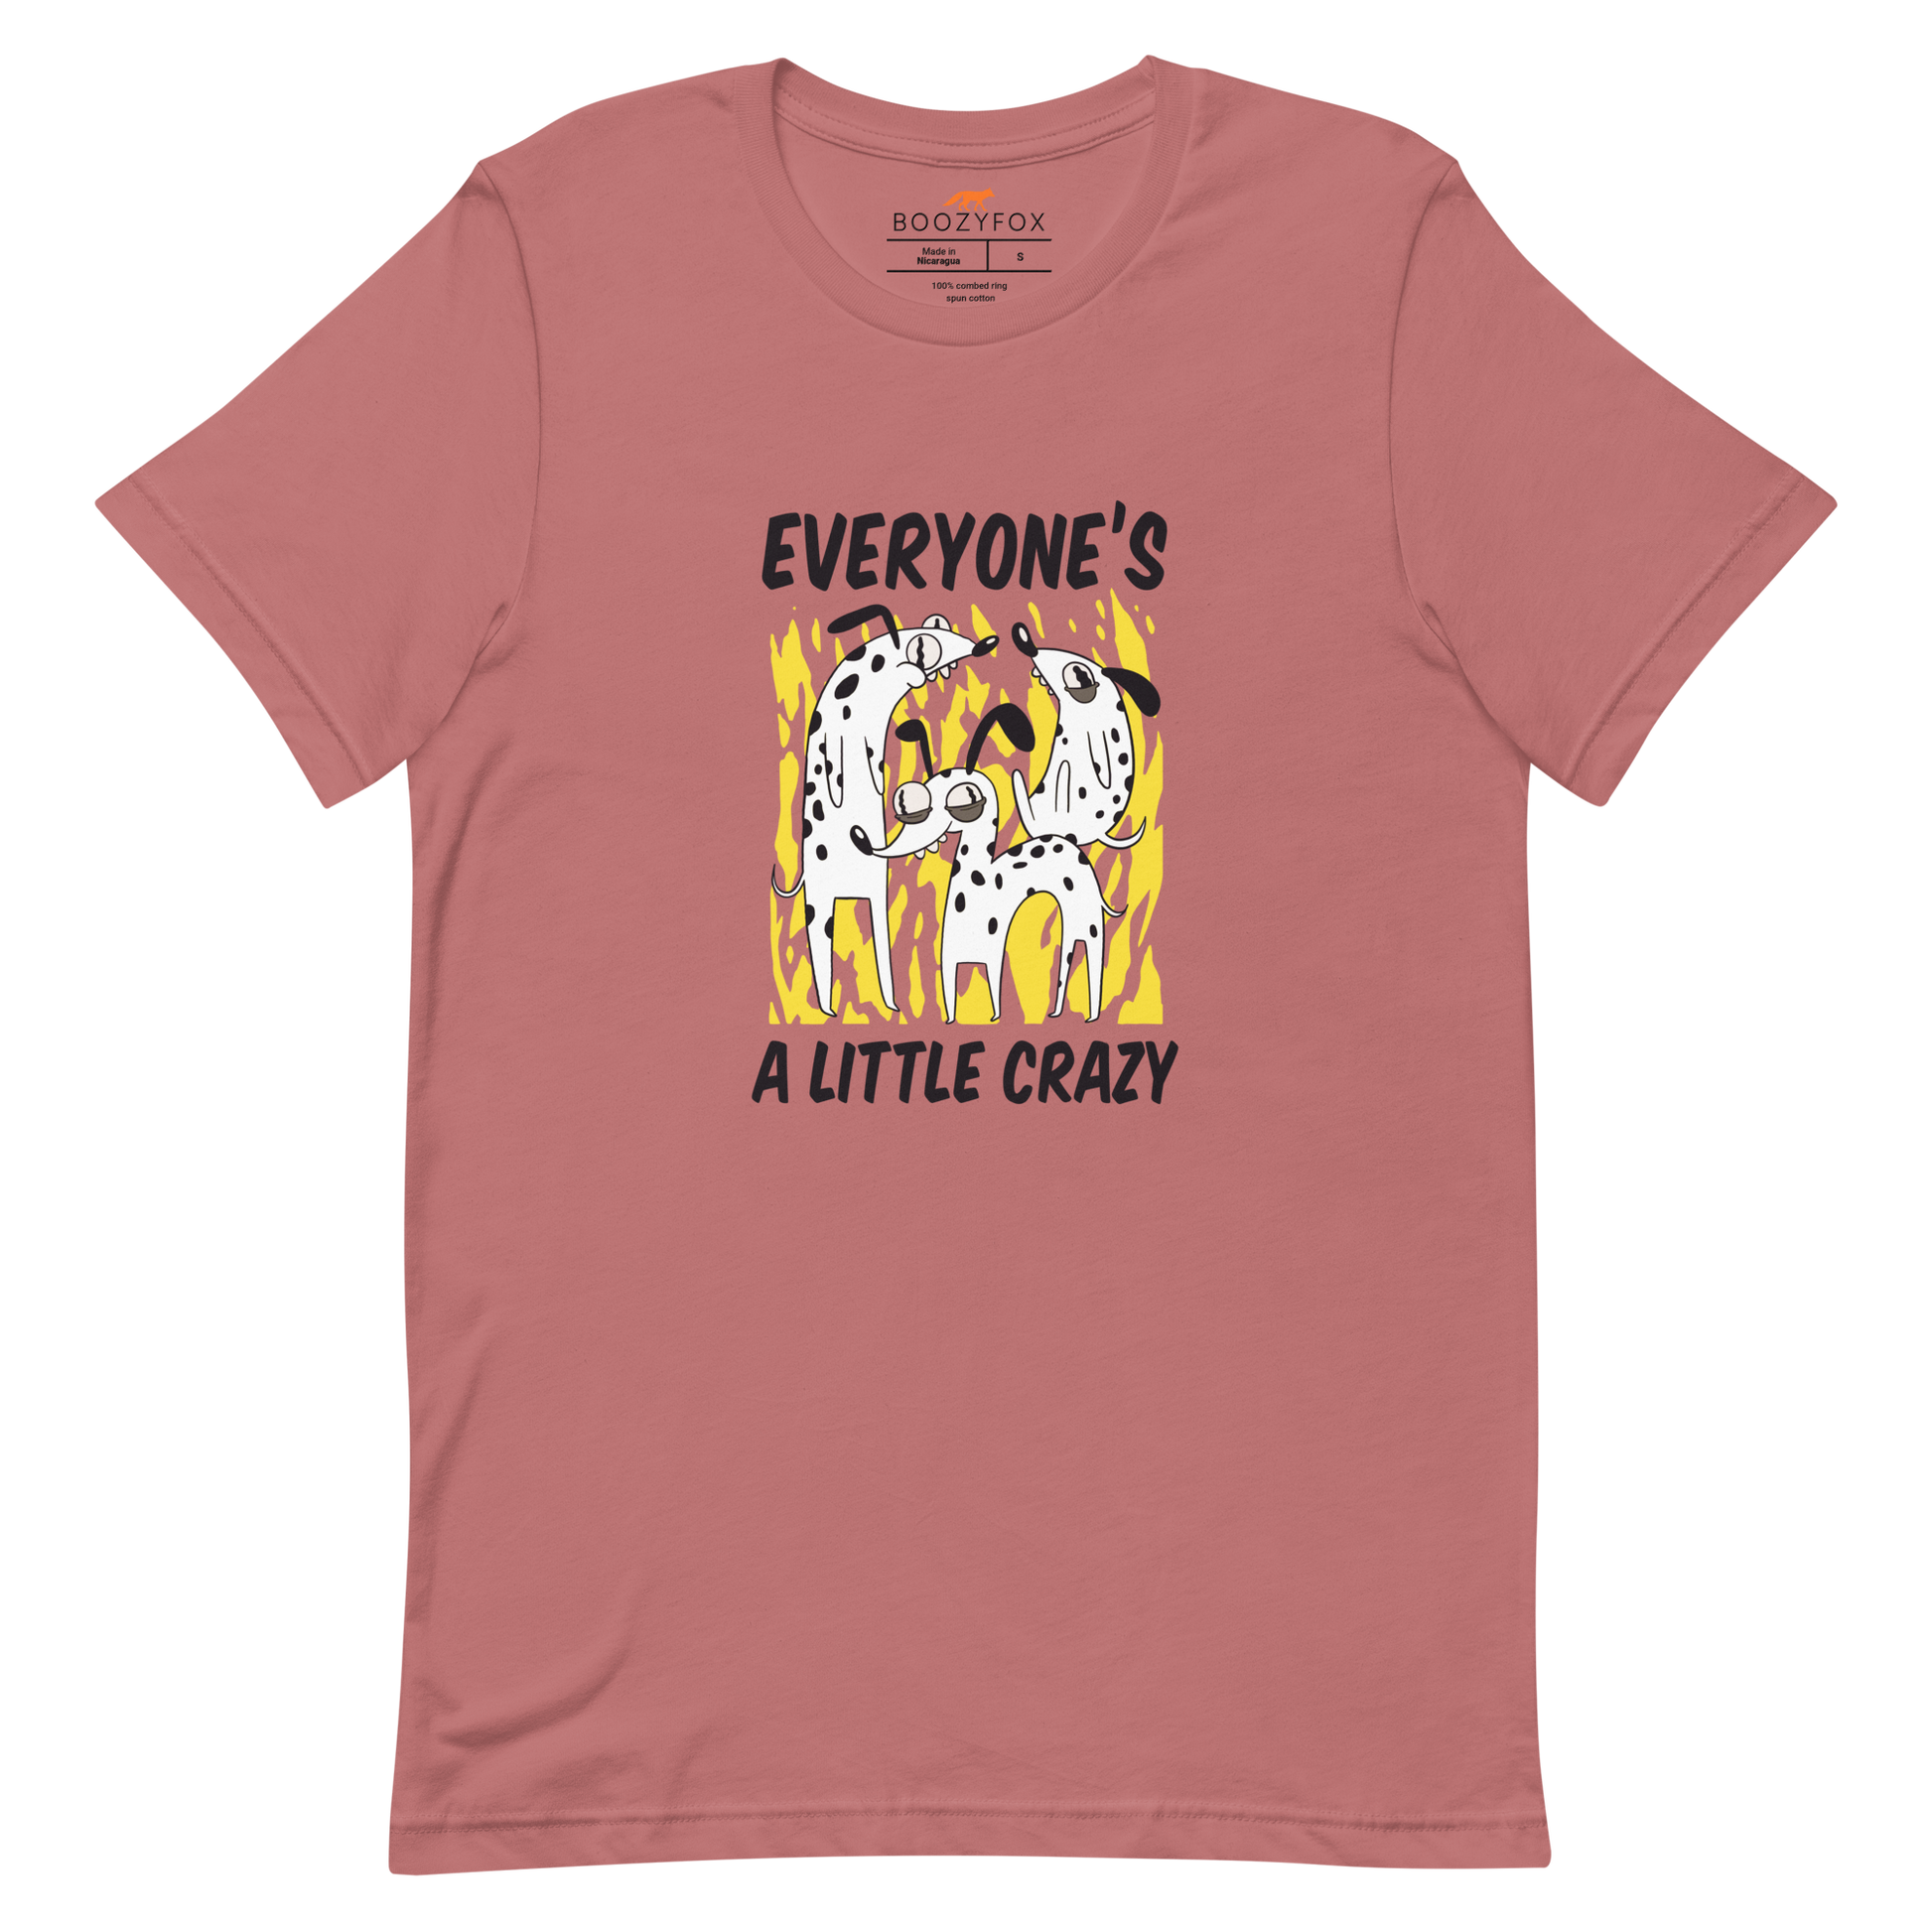 Mauve Premium Dog T-Shirt featuring a Everyone's A Little Crazy graphic on the chest - Funny Graphic Dog Tees - Boozy Fox